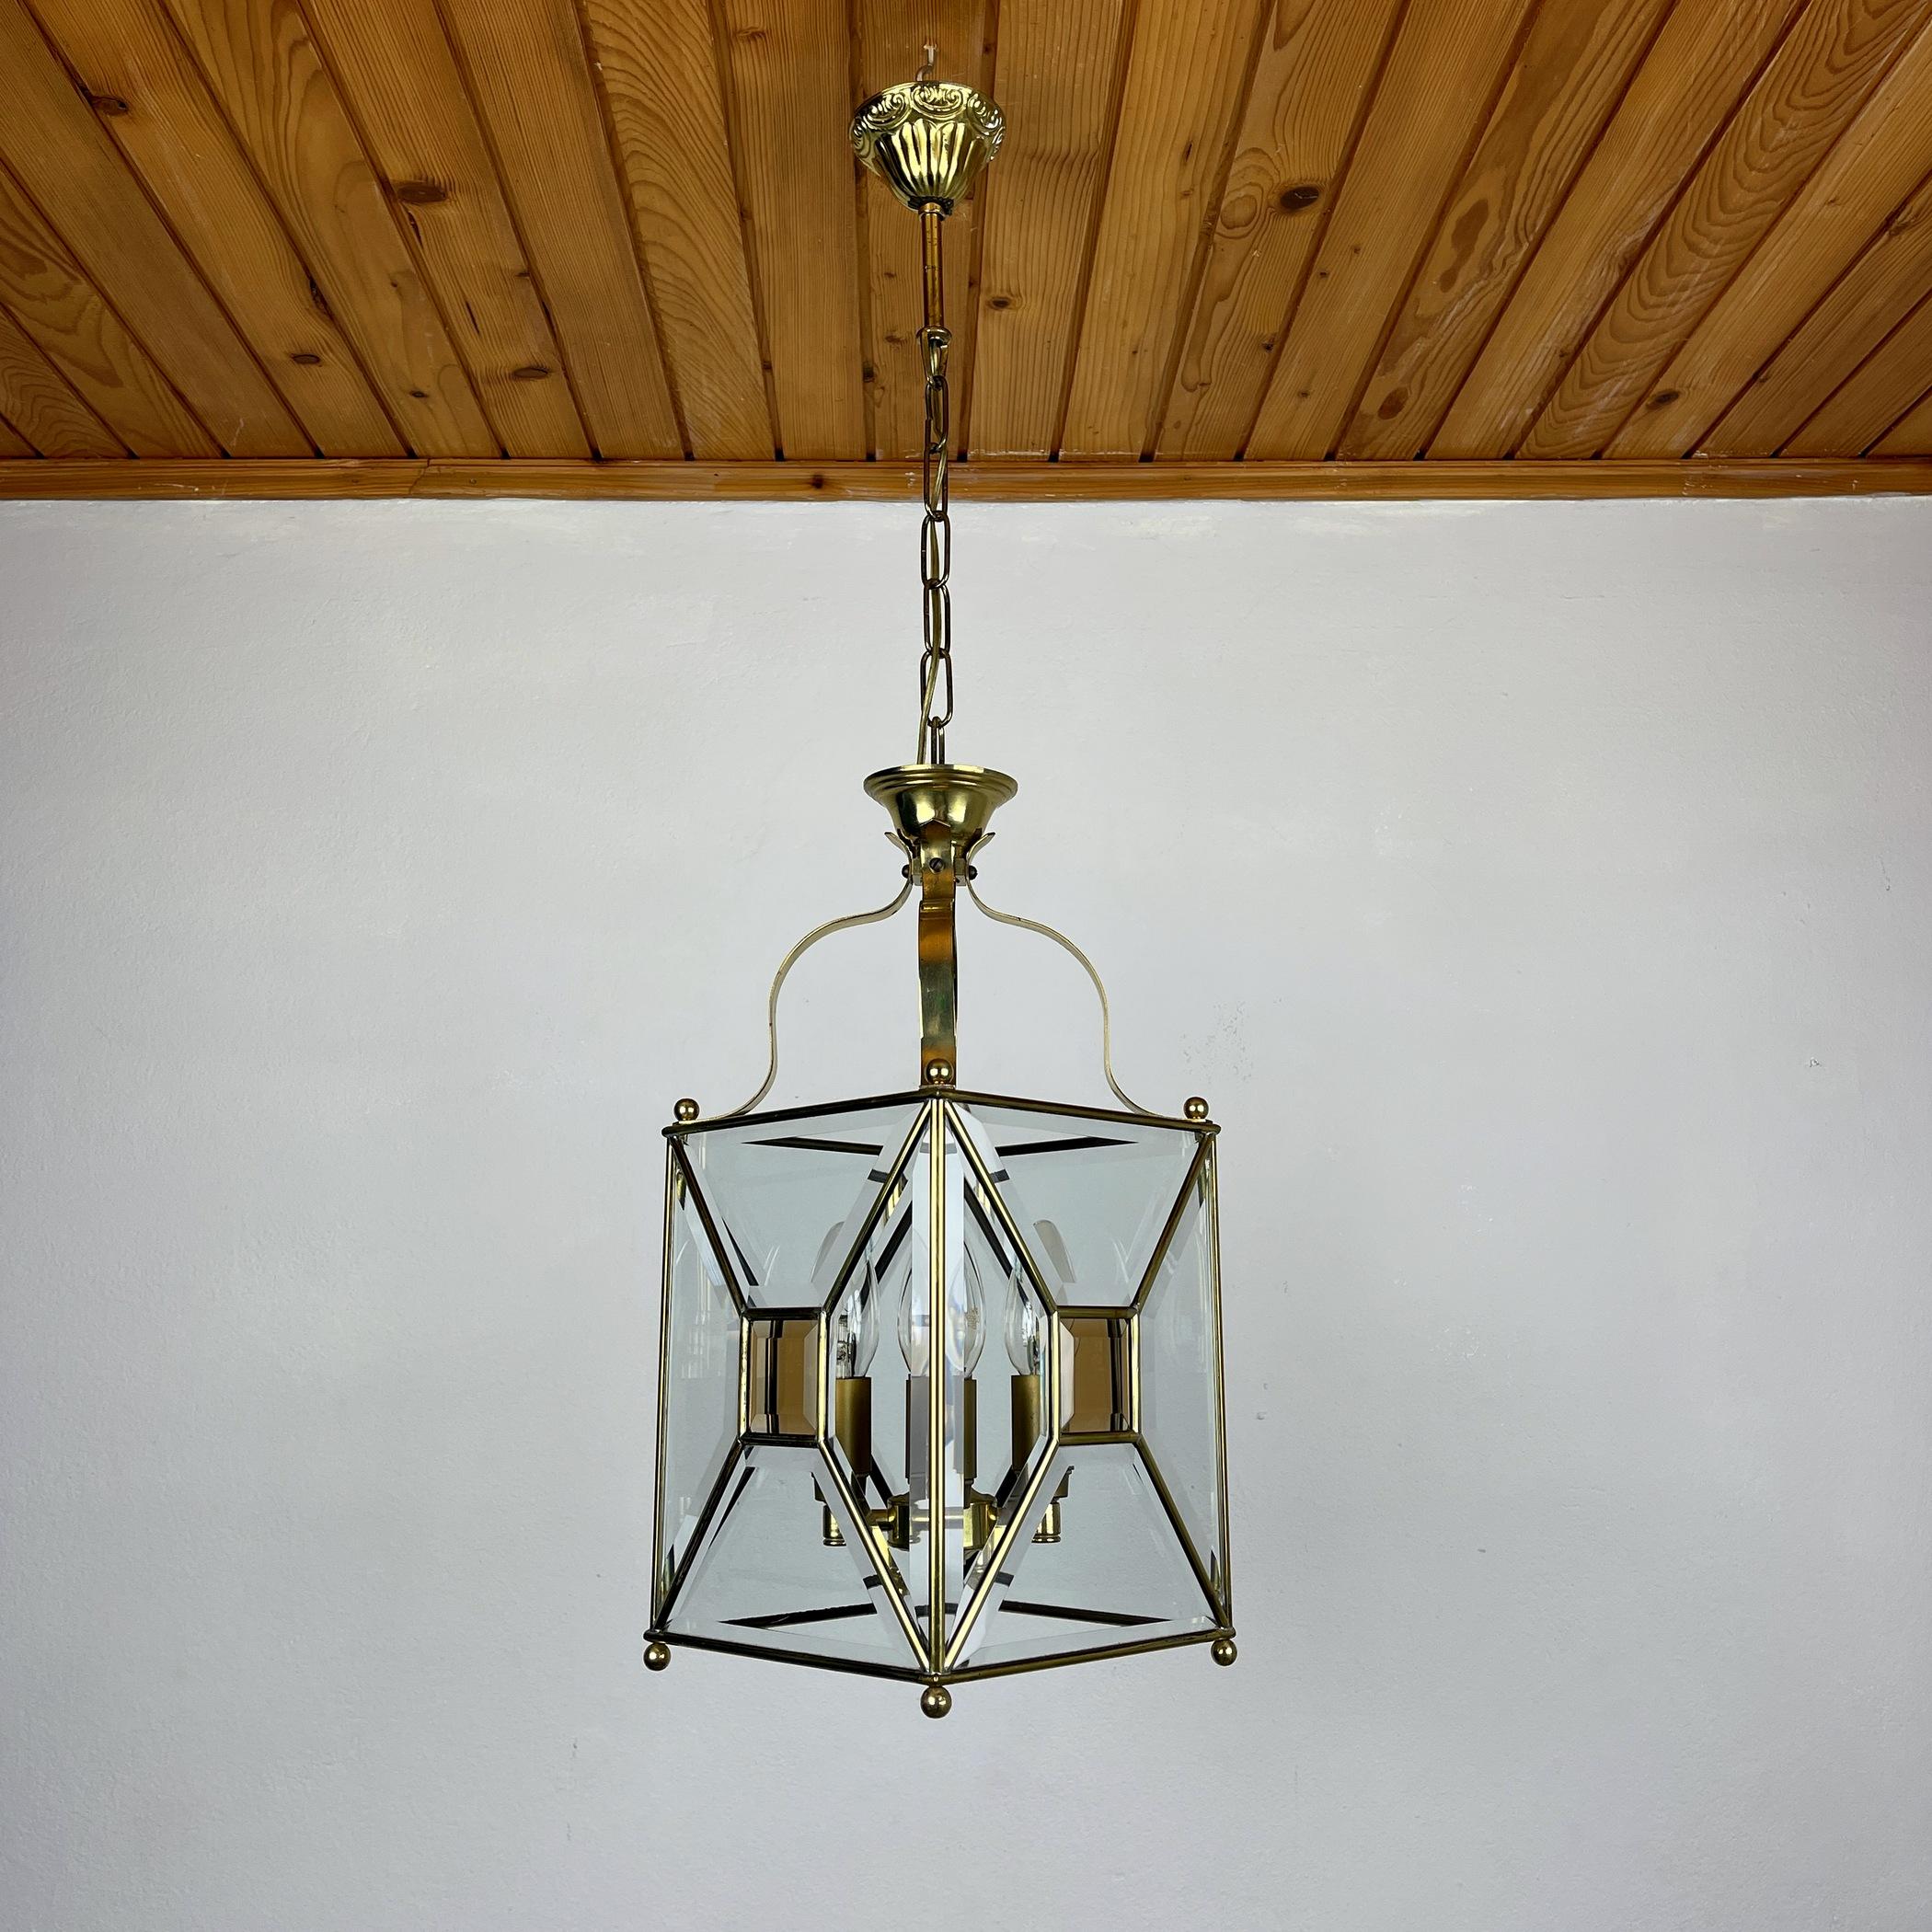 Vintage pendant lamp Italy '60s Brass Polished Glass Retro lighting Mid-century  For Sale 4